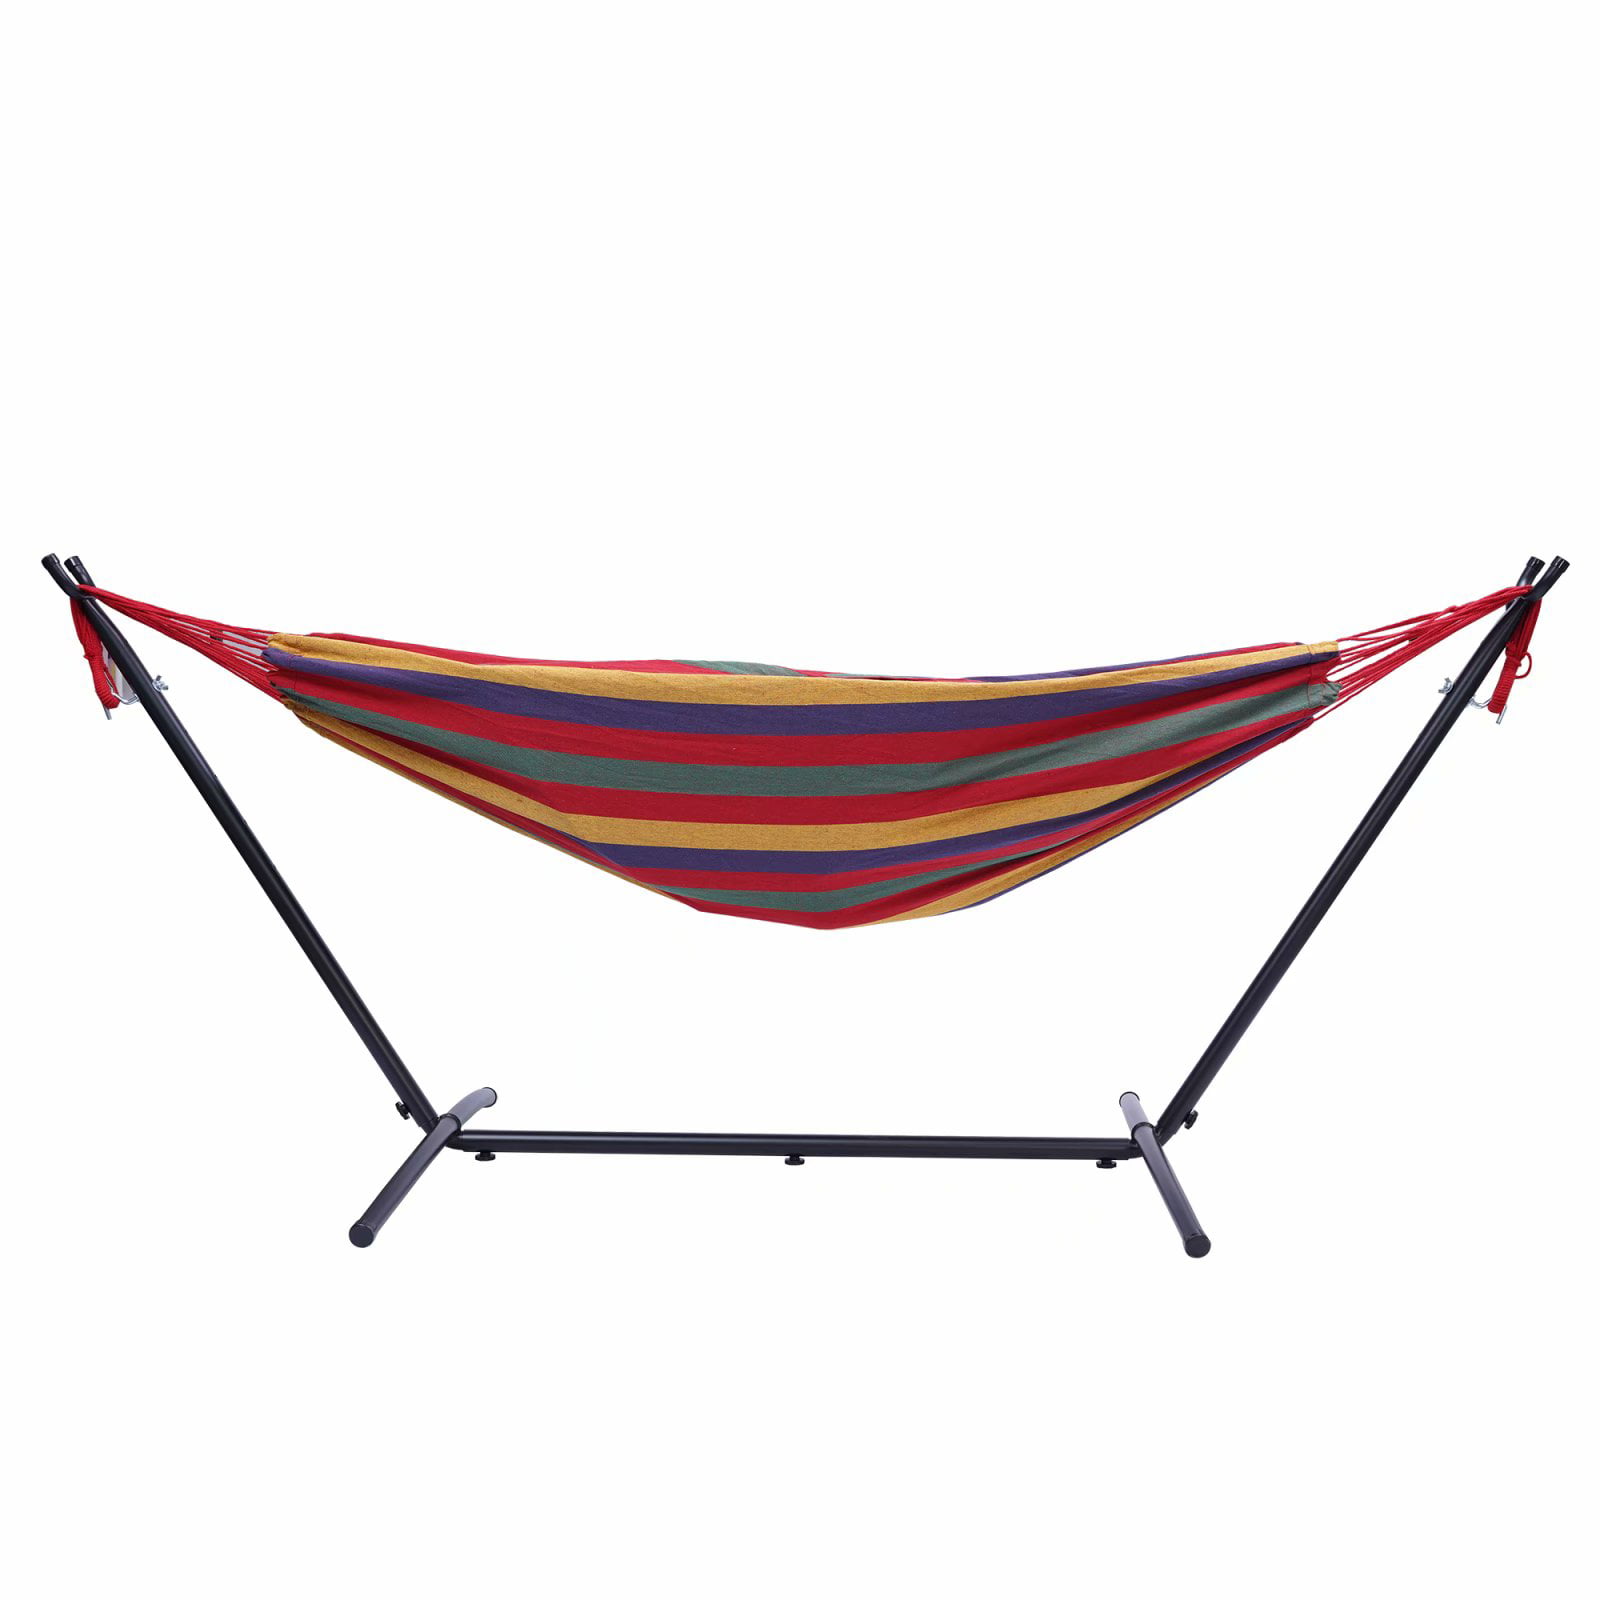 Double Hammock Two Person Adjustable Hammock Bed Storage Carrying Case Included